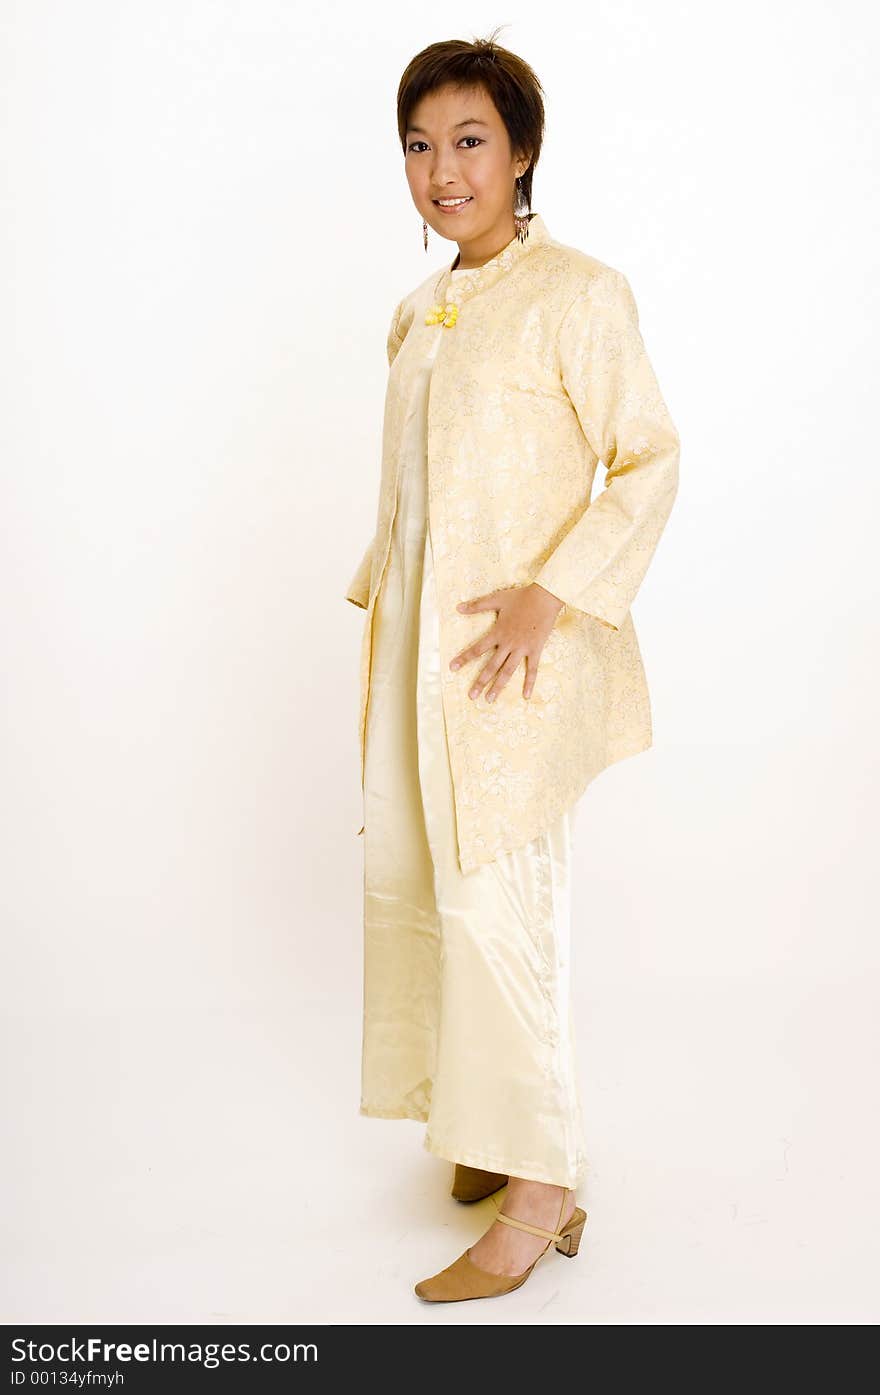 A full length shot of a young Malay woman wearing a traditional yellow jacket and dress. A full length shot of a young Malay woman wearing a traditional yellow jacket and dress